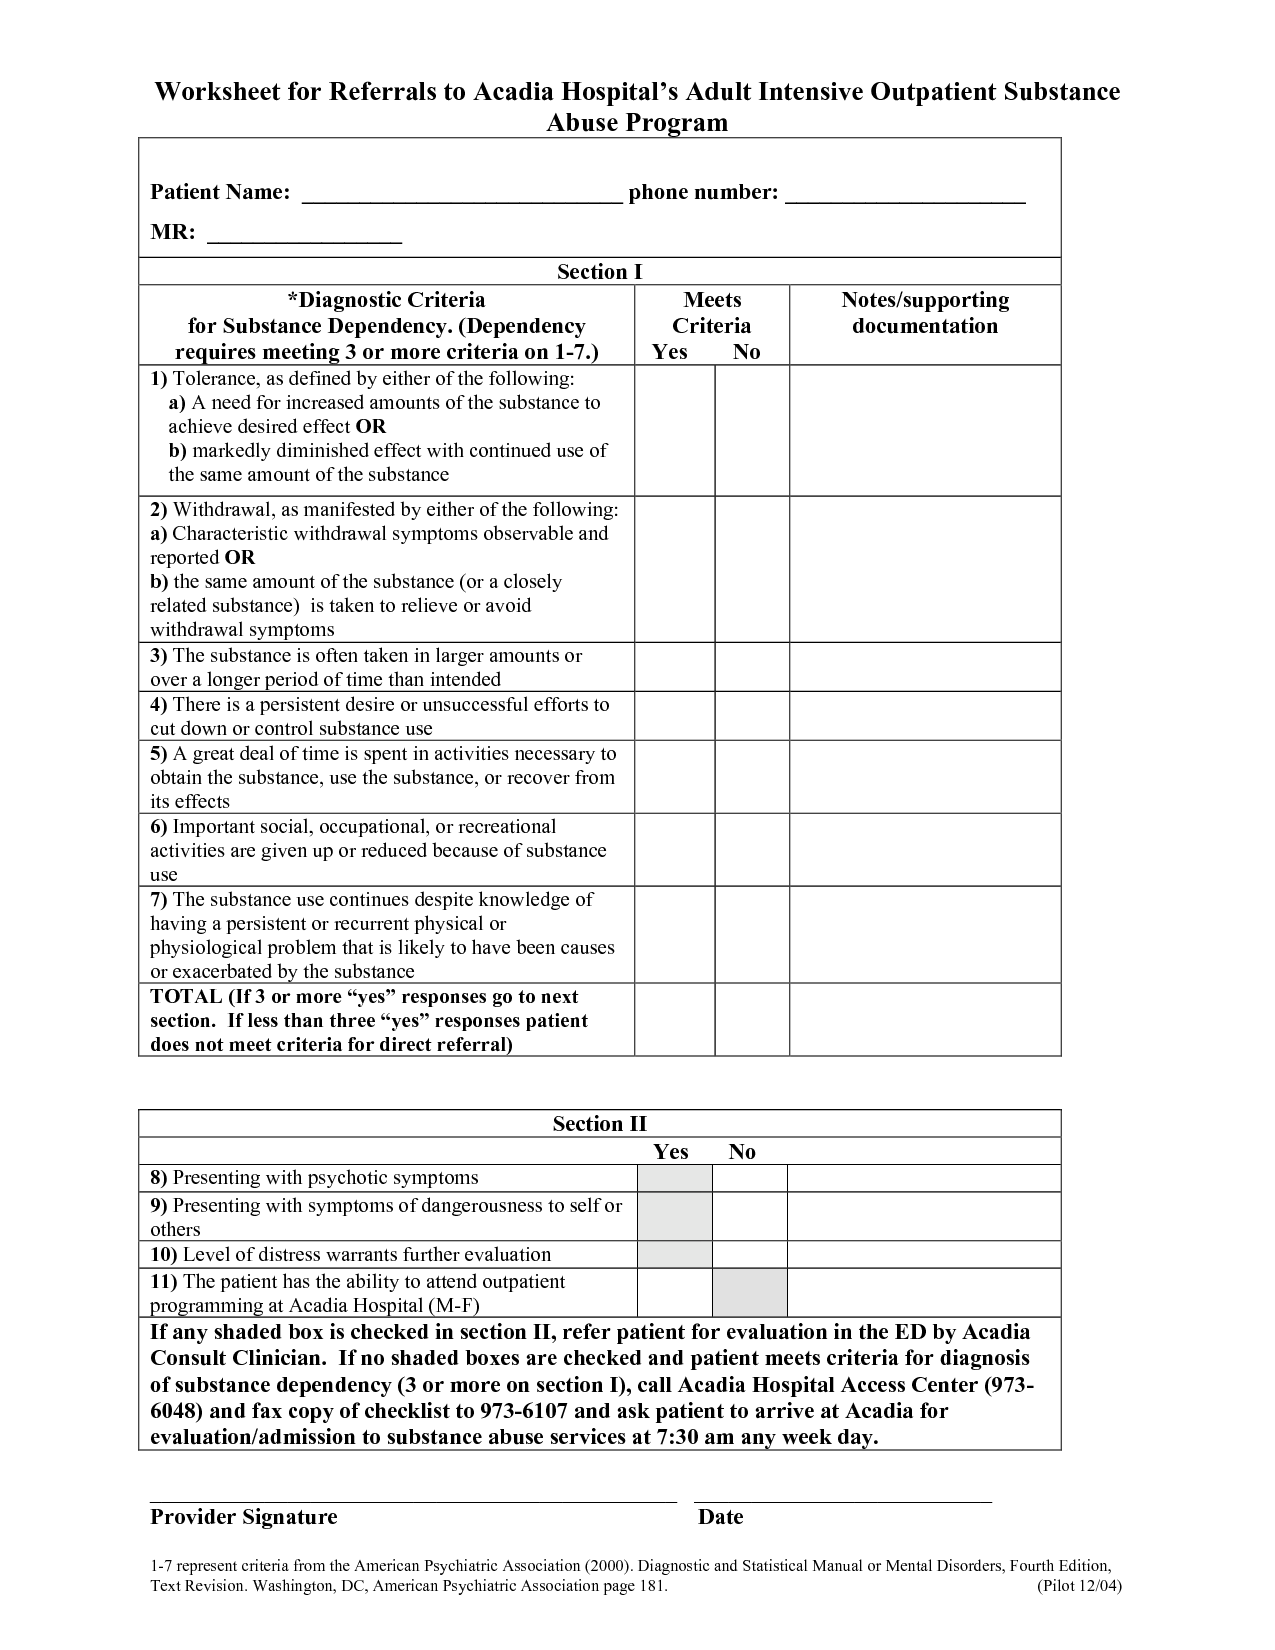 Free Substance Abuse Worksheets for Adults Image